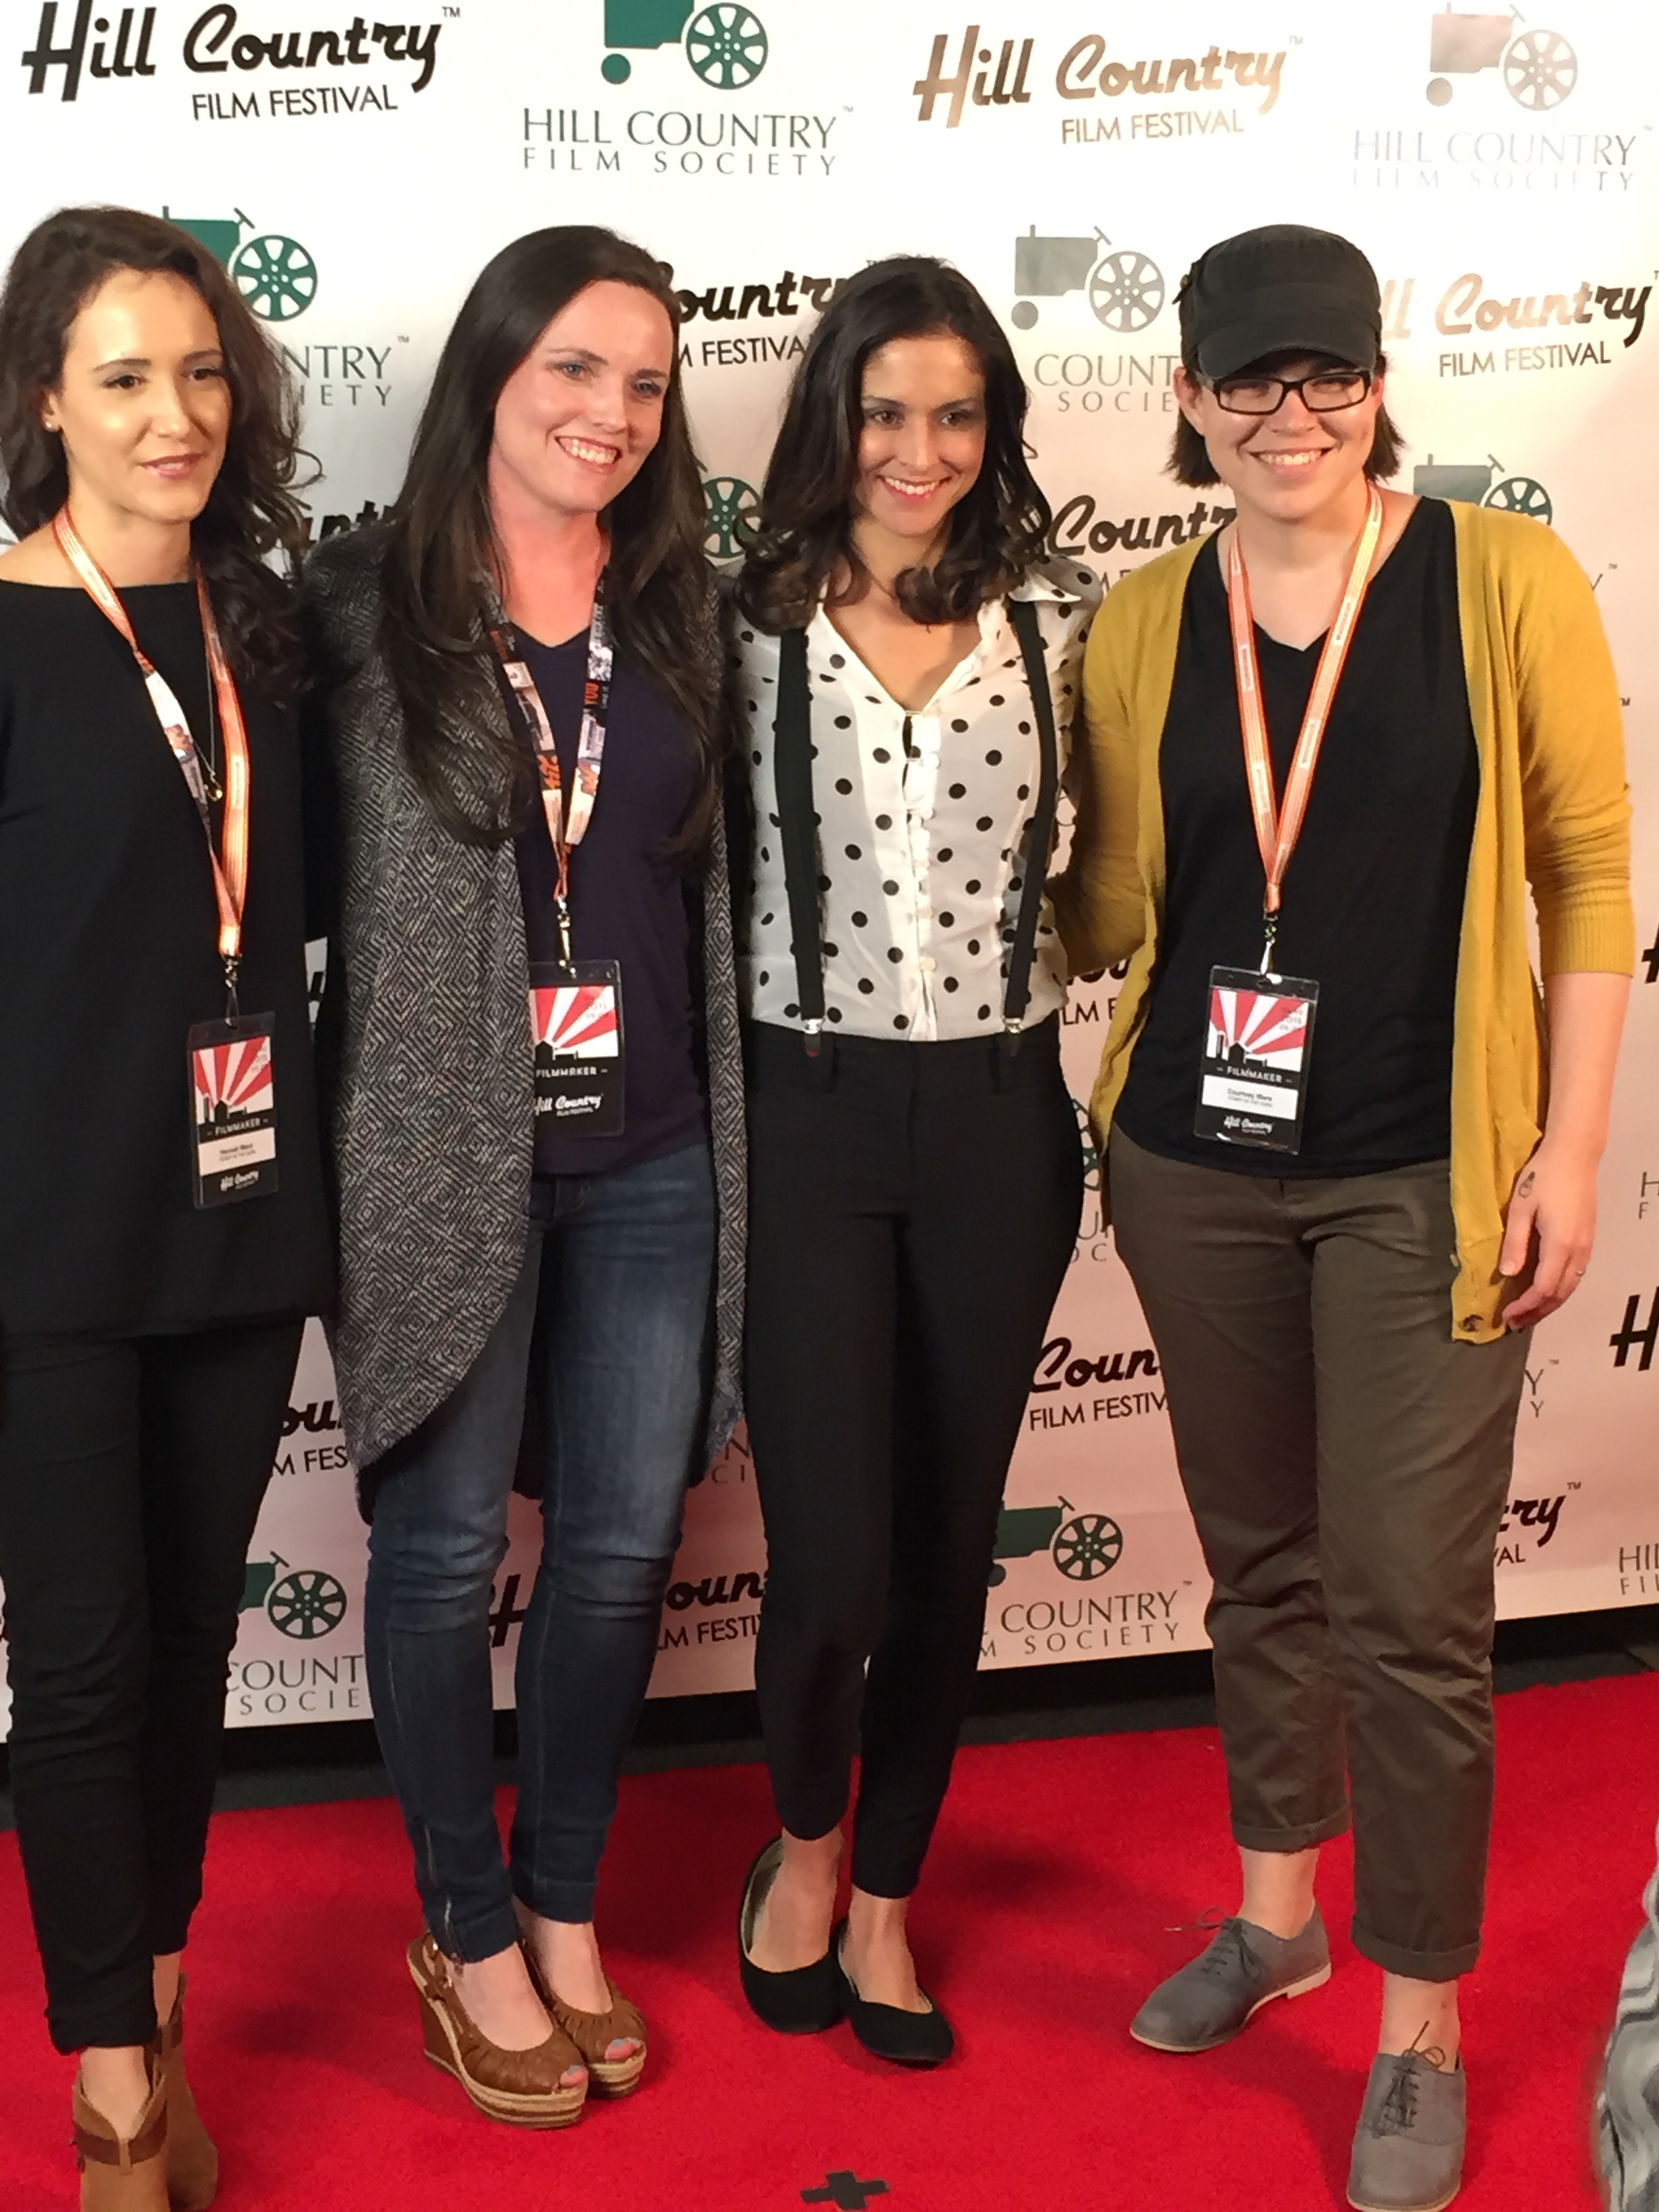 Hannah Schollhammer, Meredith Burke, Candice Barley and Courtney Ware at Sunny in the Dark premier